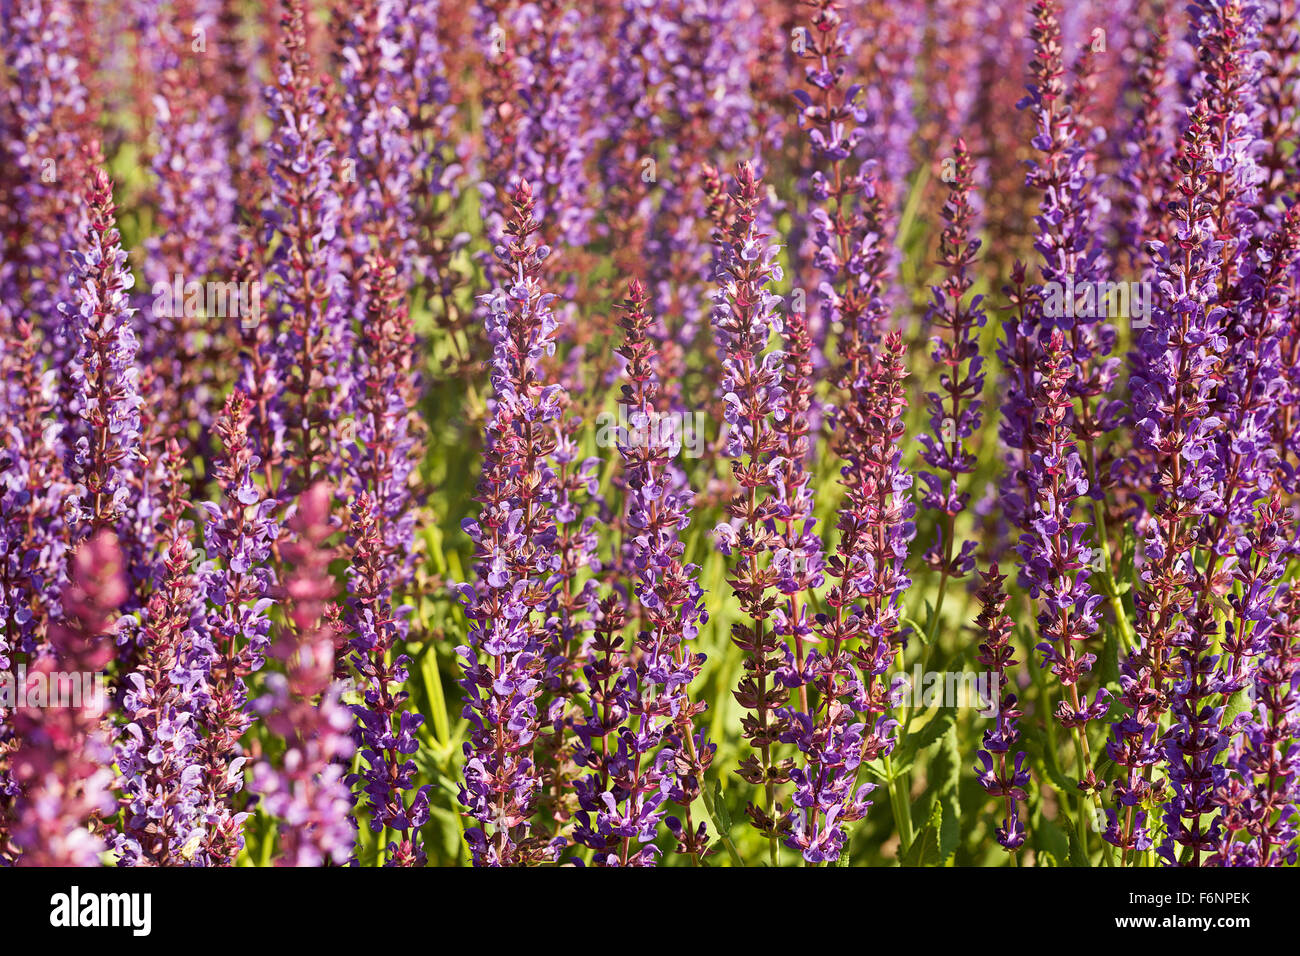 Lamiaceae family violet field herb background Stock Photo